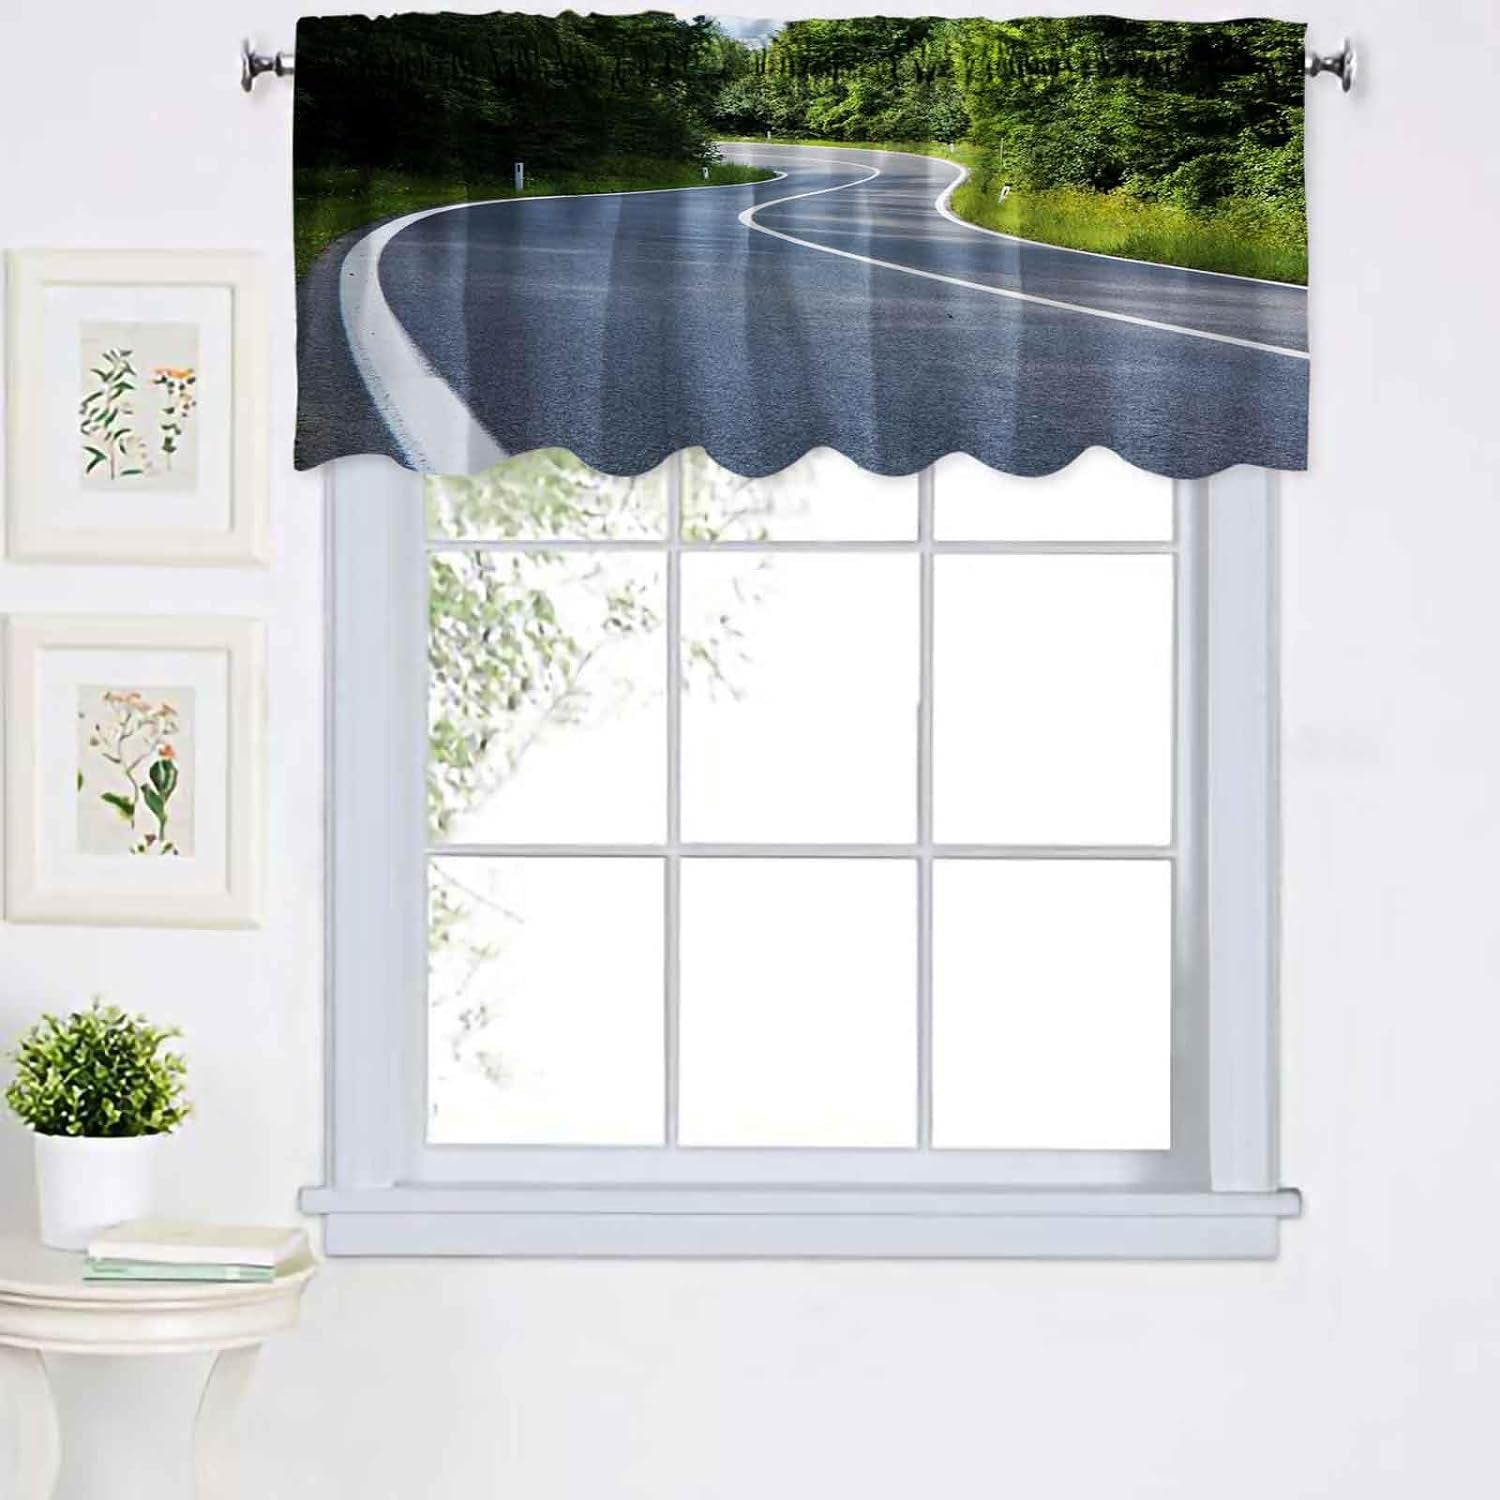 Blackout Valance Straight Asphalt Road Leading into Distance Valance 52X18 Inches Window Valance for Bedroom